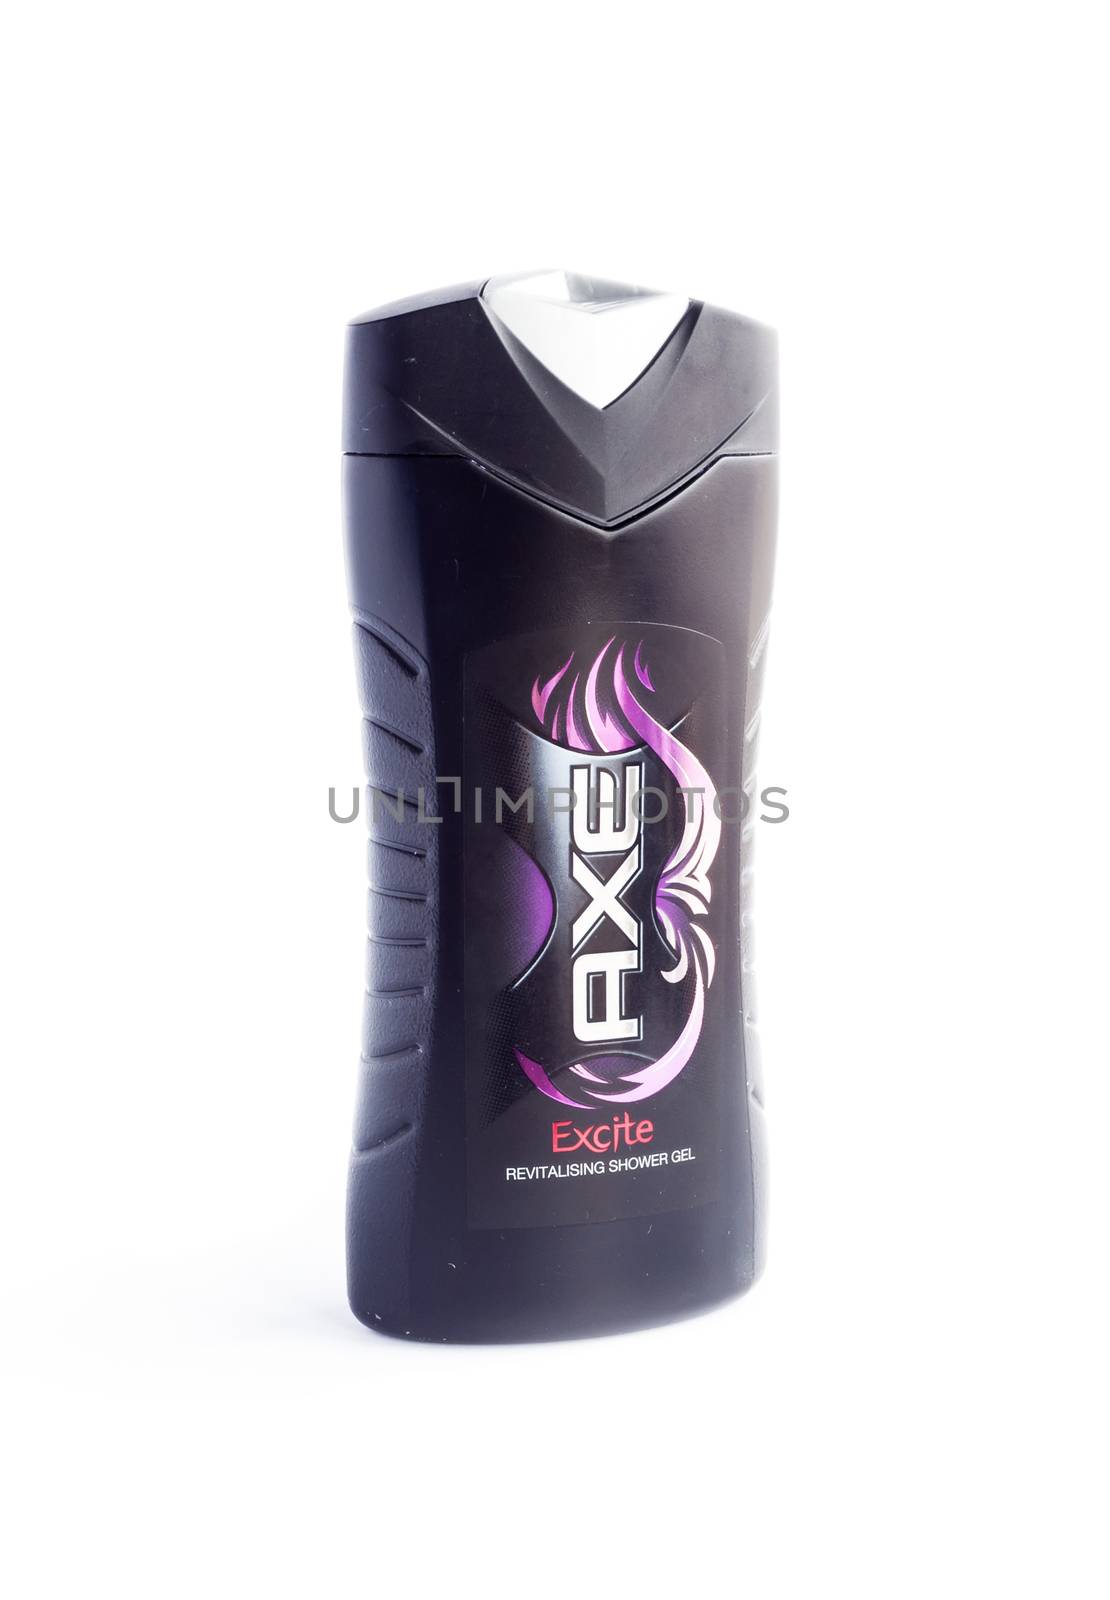 Bucharest, Romania - Jan 24, 2014: A bottle of Axe Excite shower gel isolated on white background. Axe was launched in France in 1983 by Unilever. It was inspired by another of Unilever's brands, Impulse.